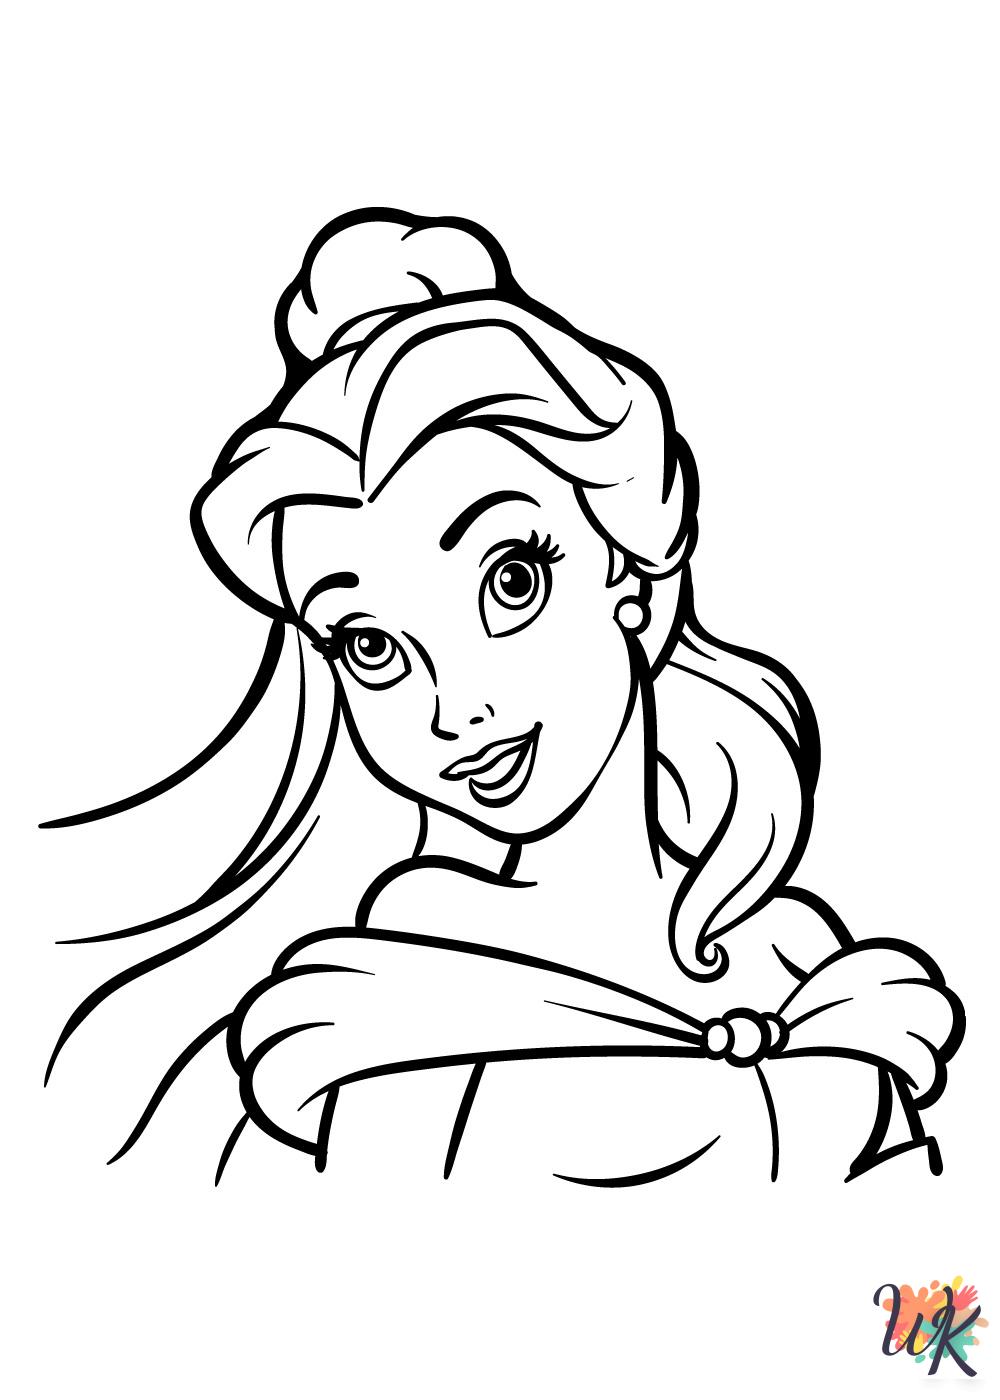 Belle coloring pages for adults